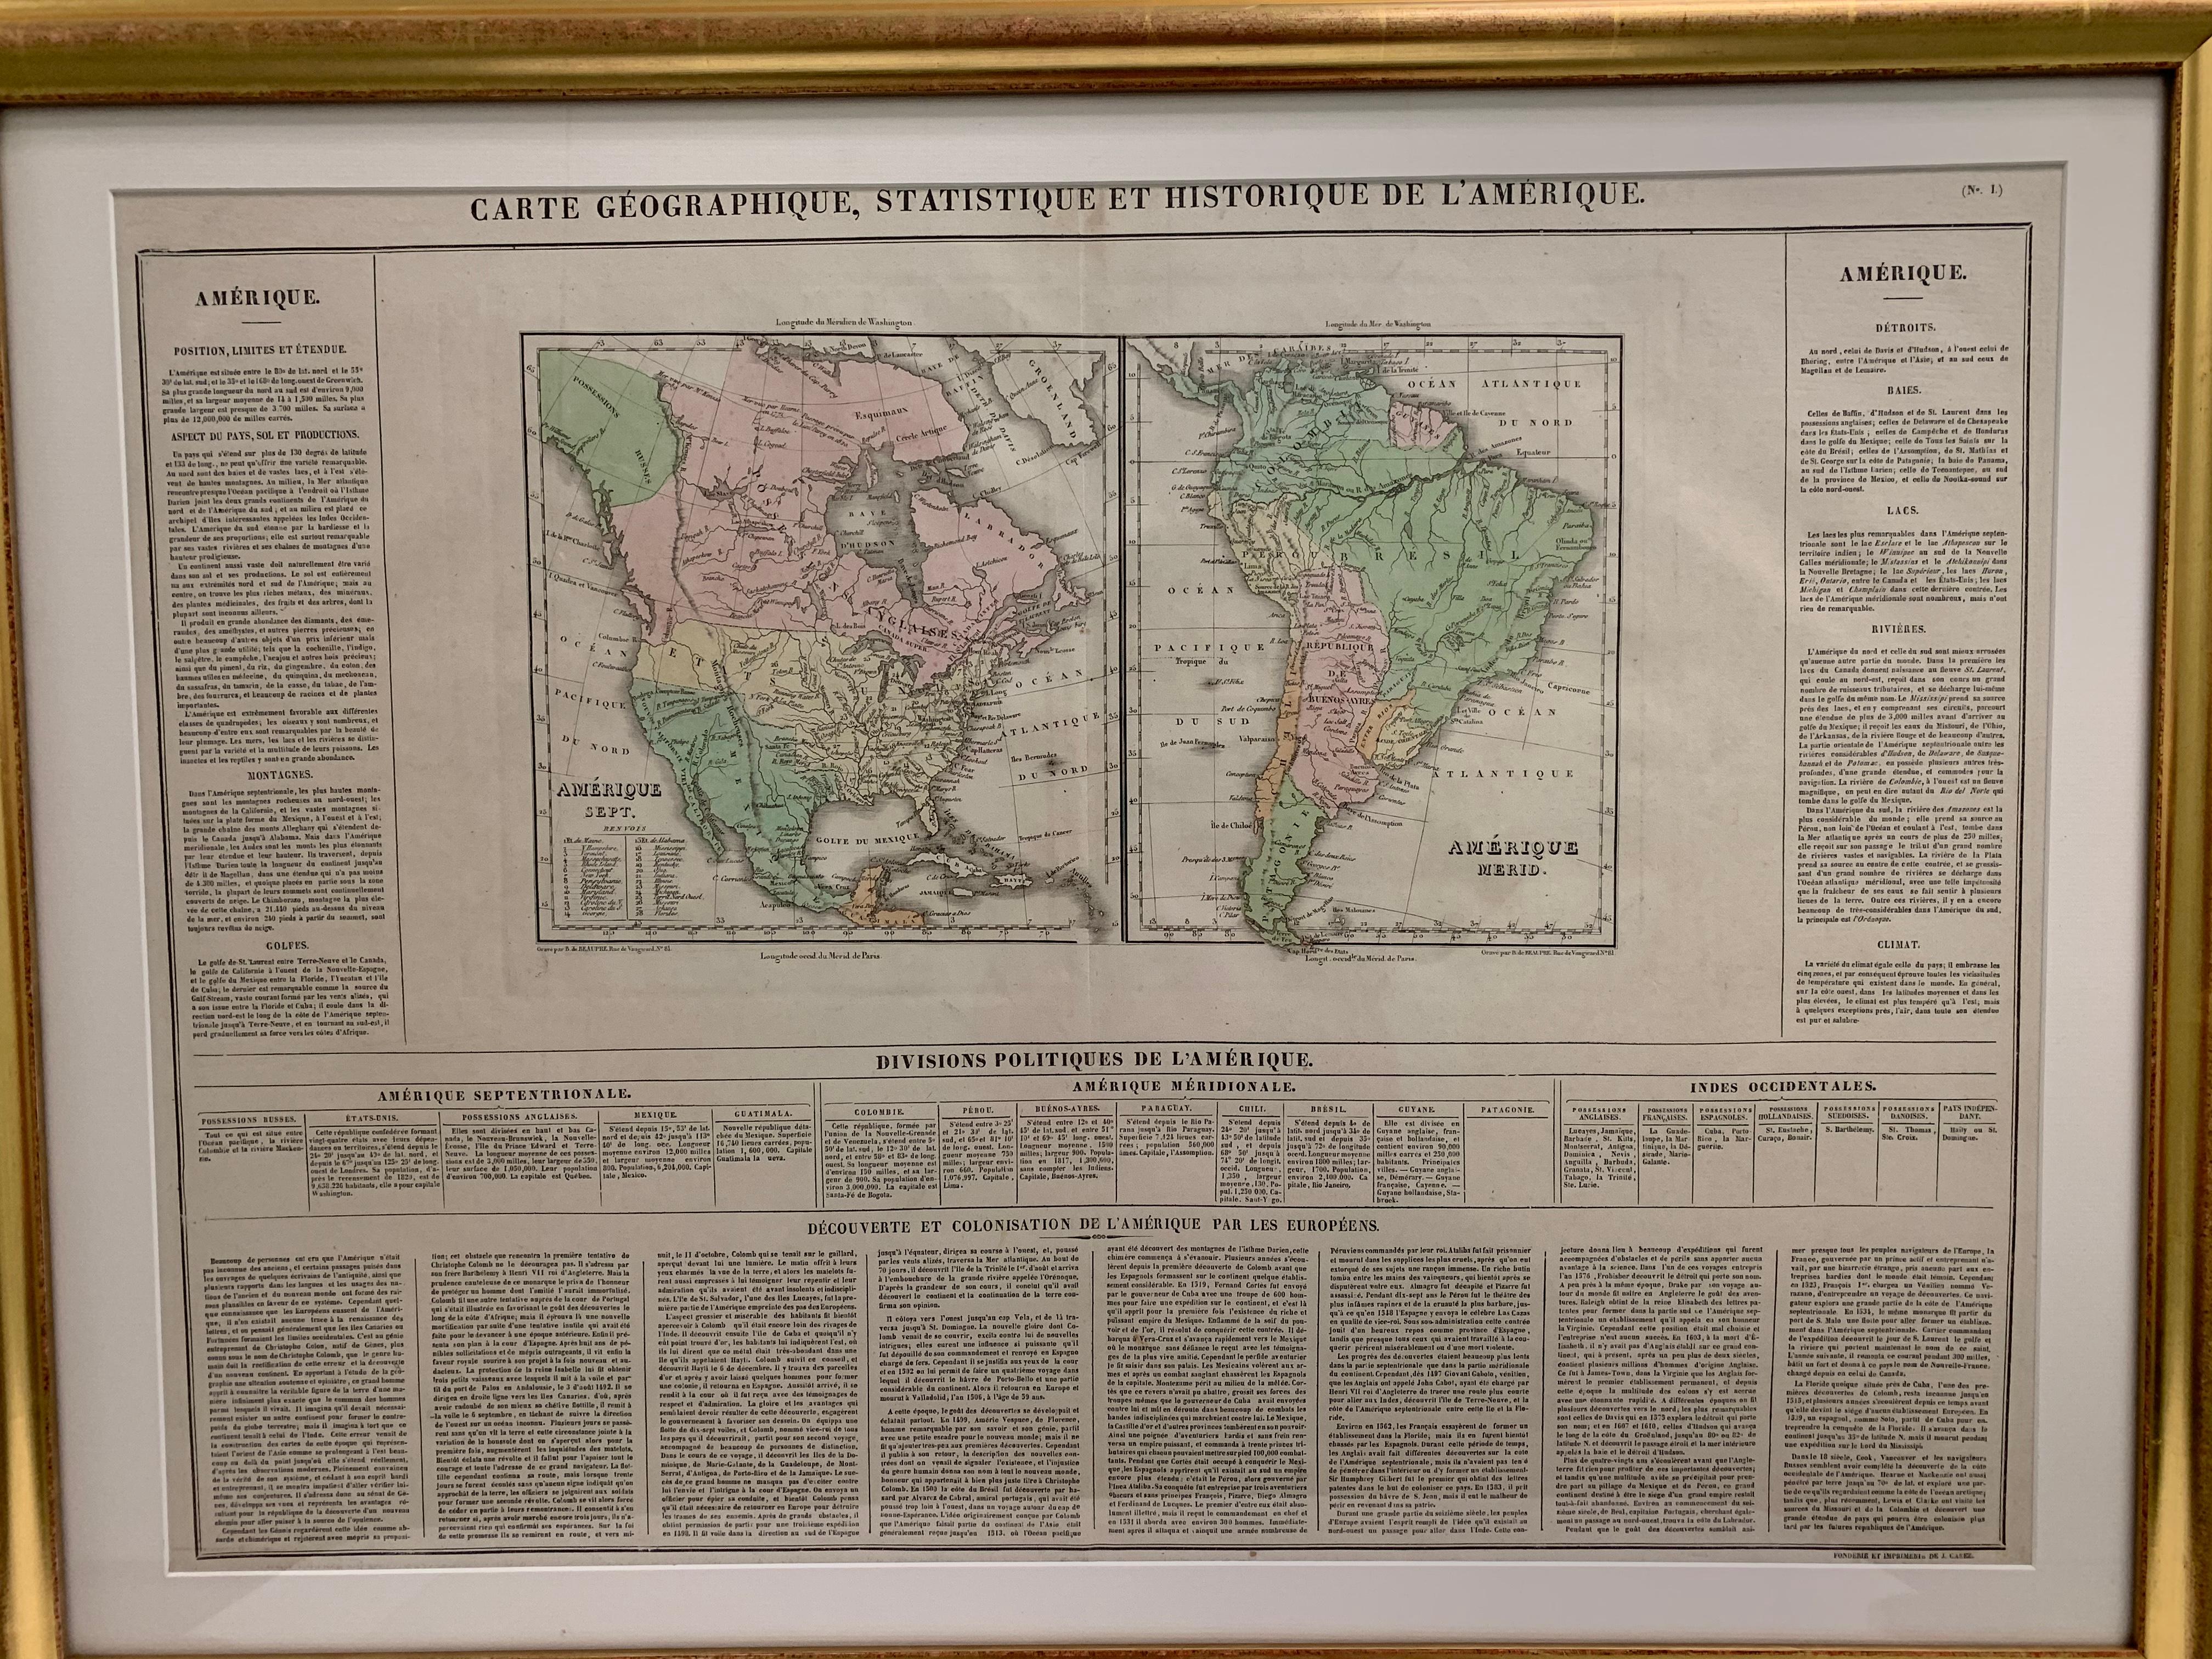 Framed 1820s hand colored map photos of North America and South America. As found framed in giltwood frame.